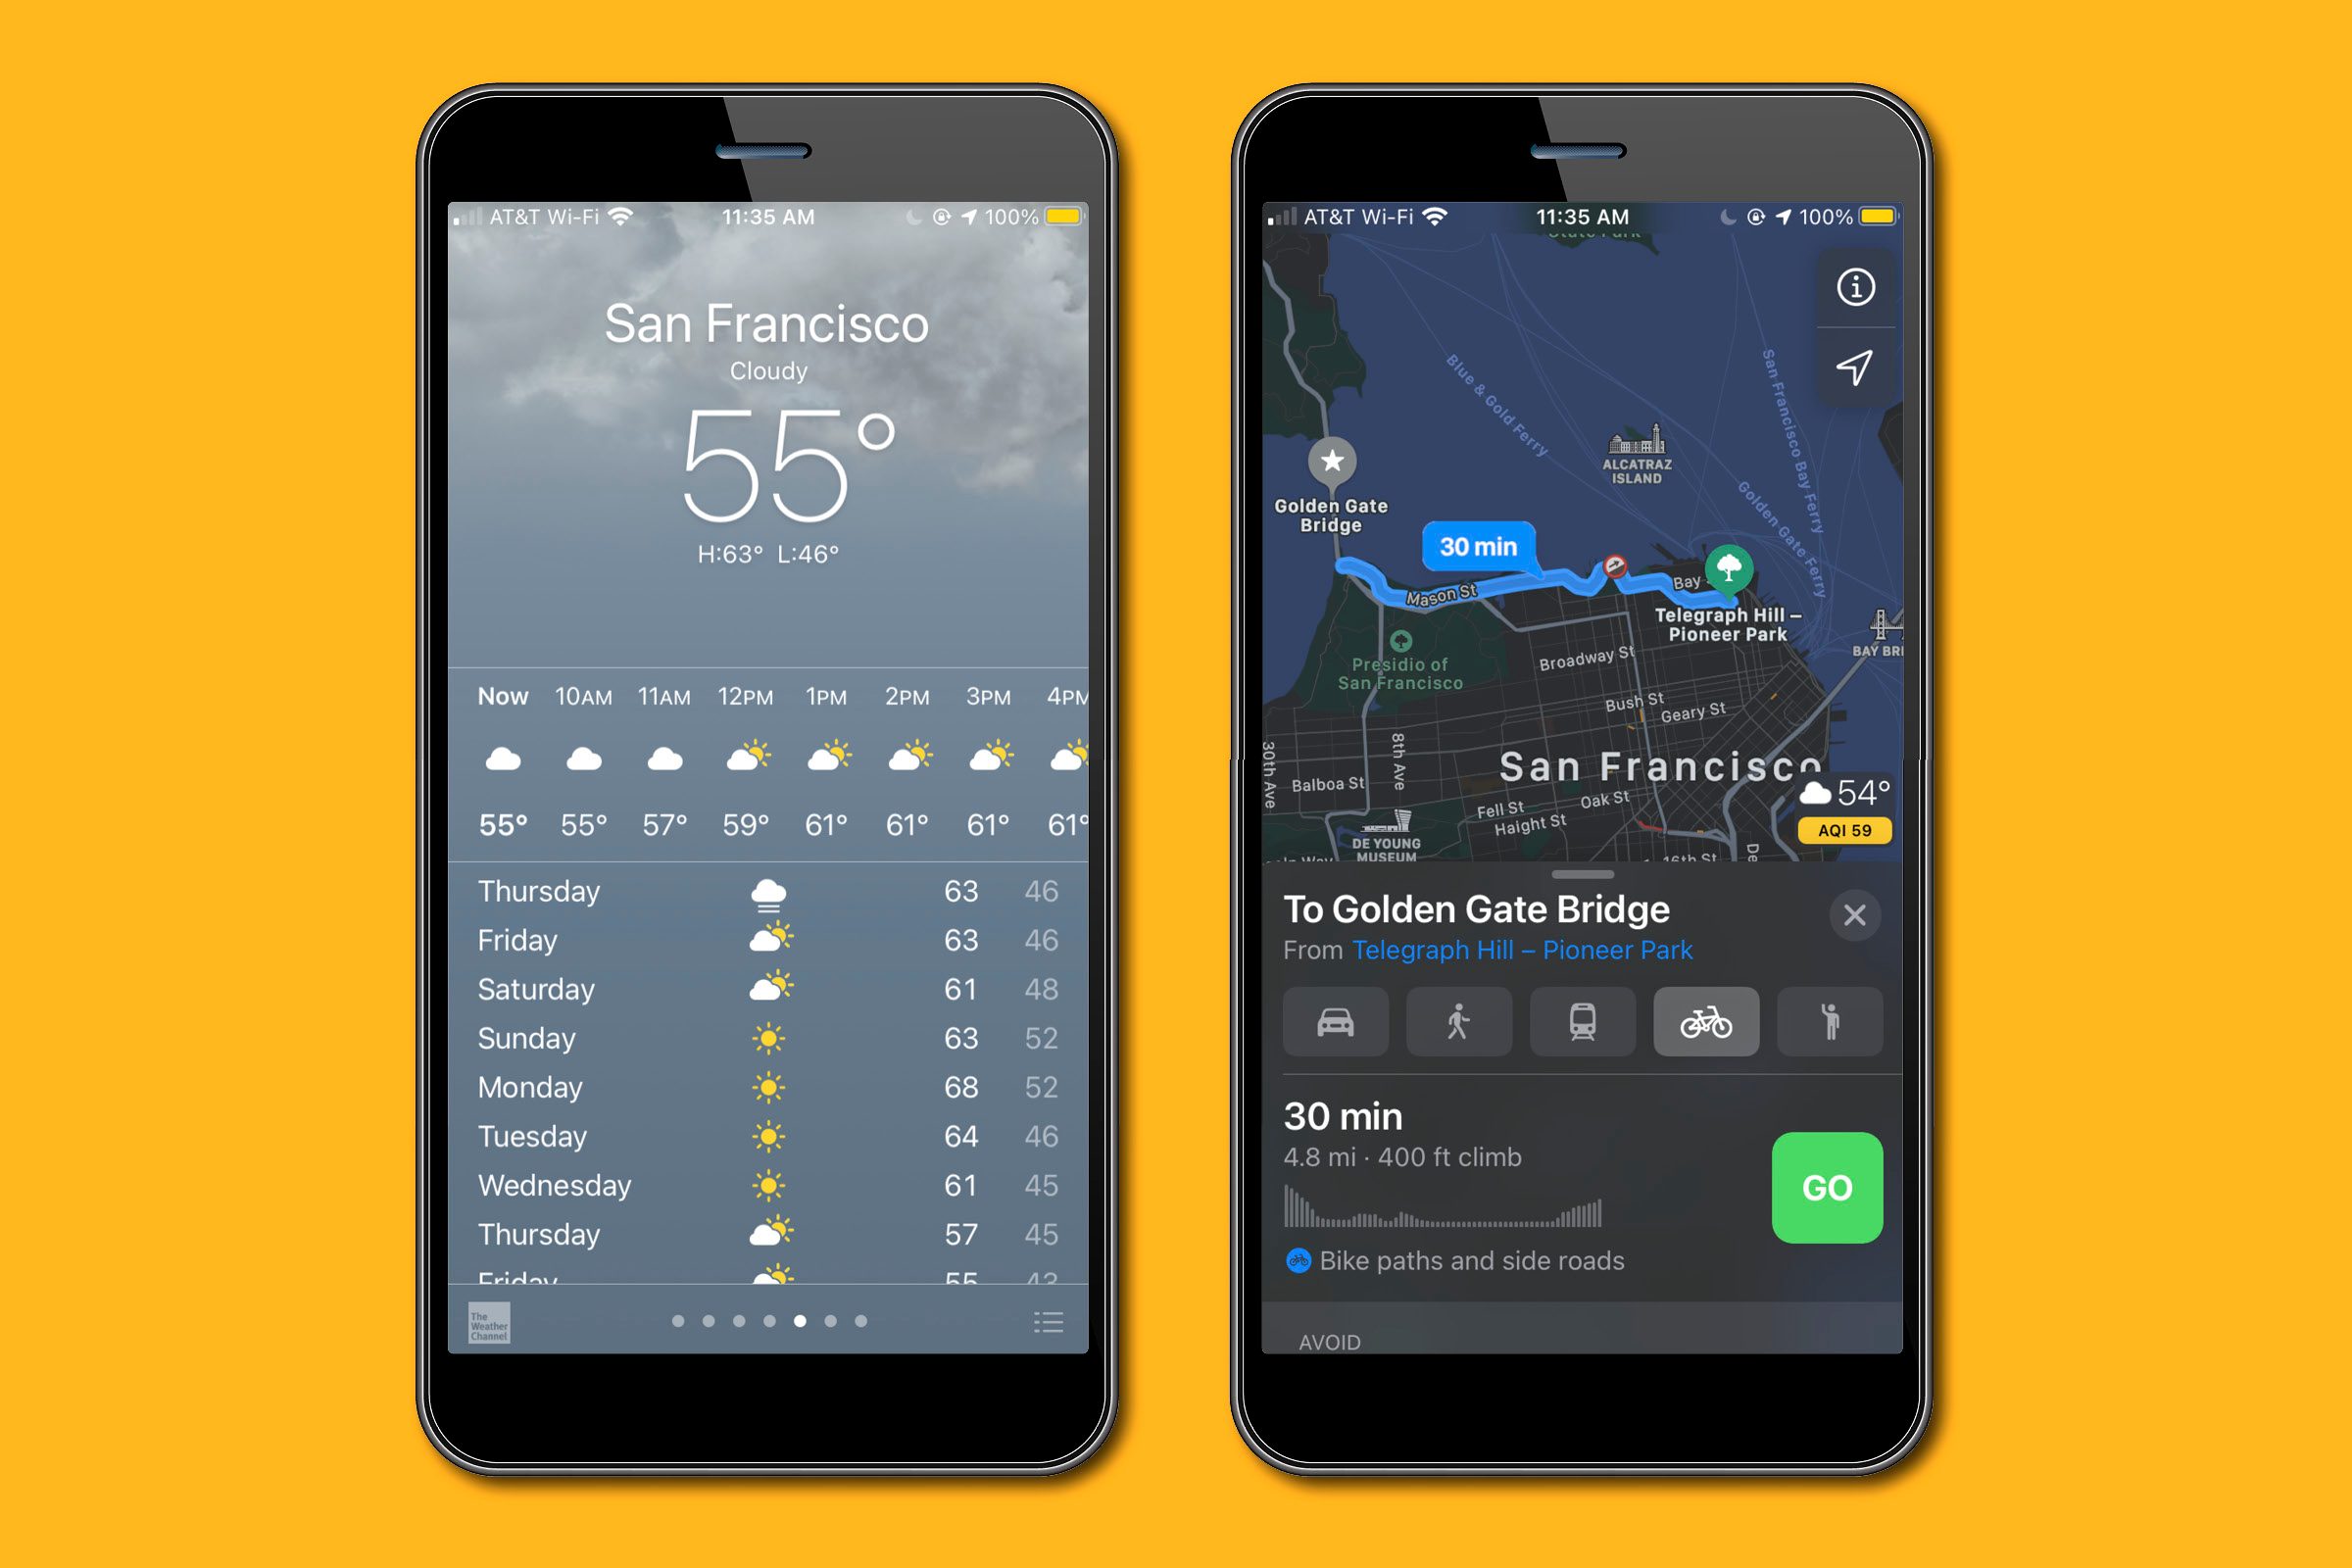 iPhone screens showing the weather app and map app in San Francisco